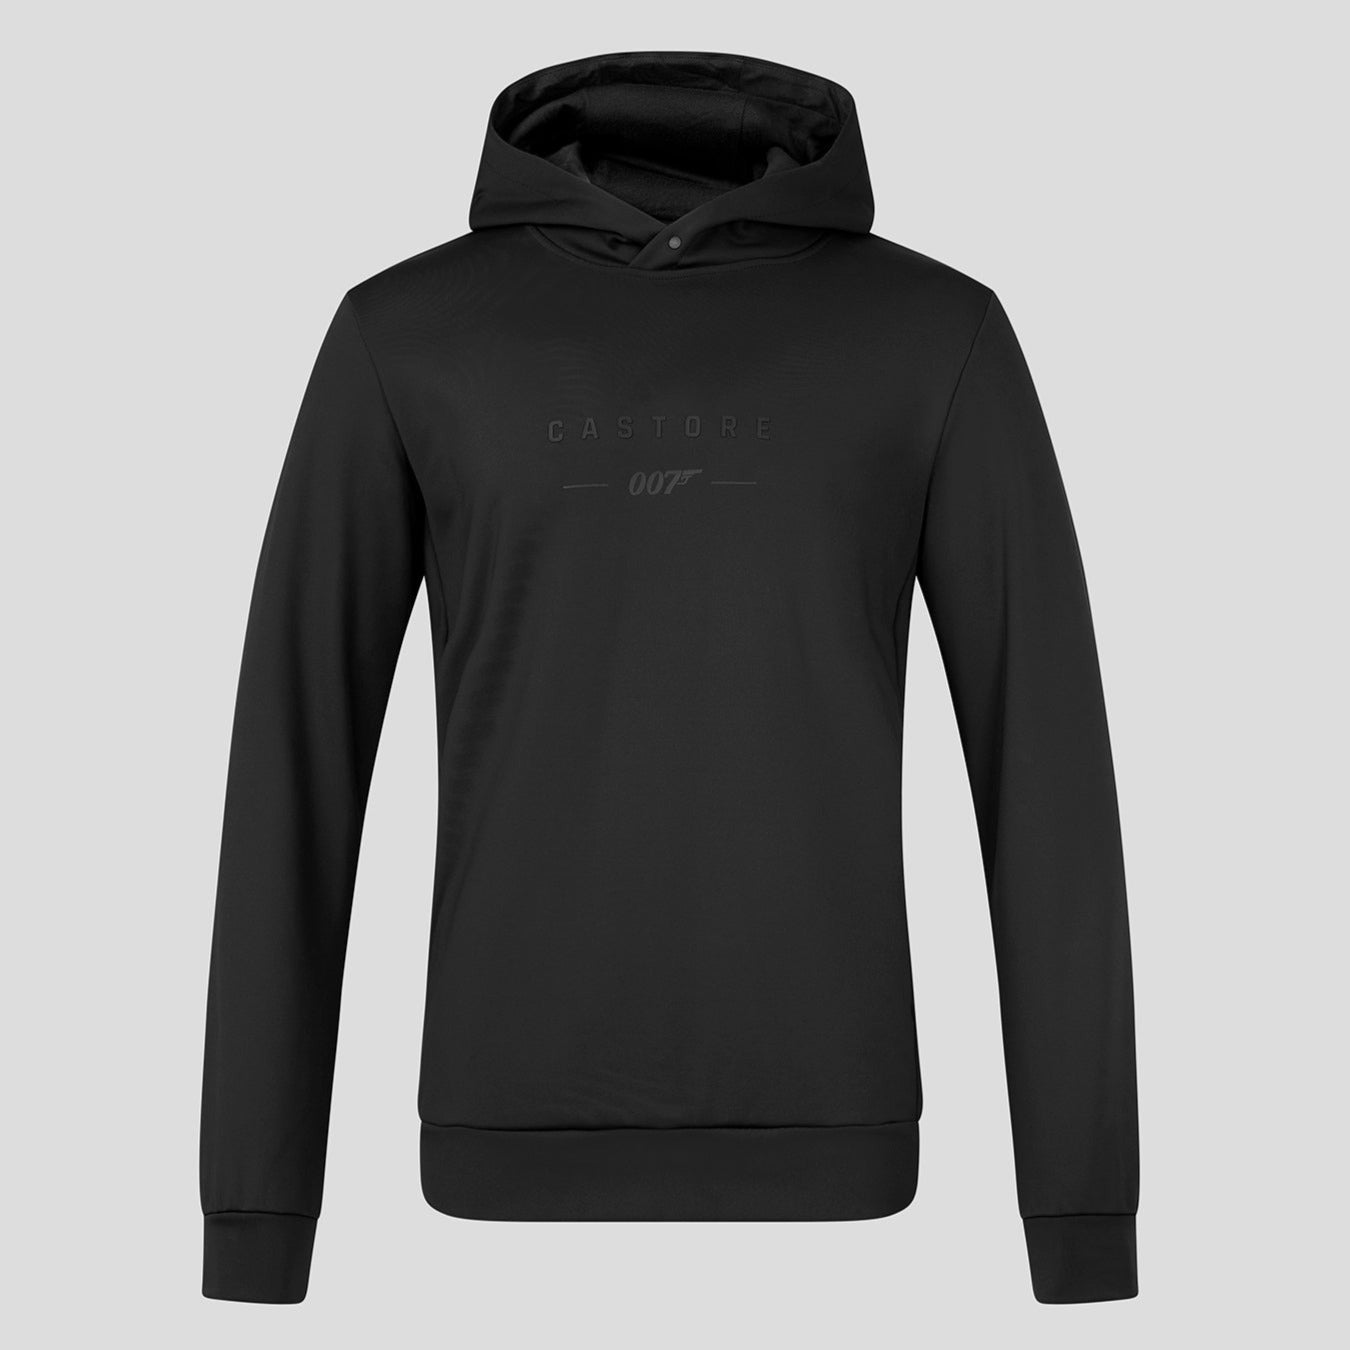 James Bond Water-resistant Hoodie - By Castore (Outlet Item)